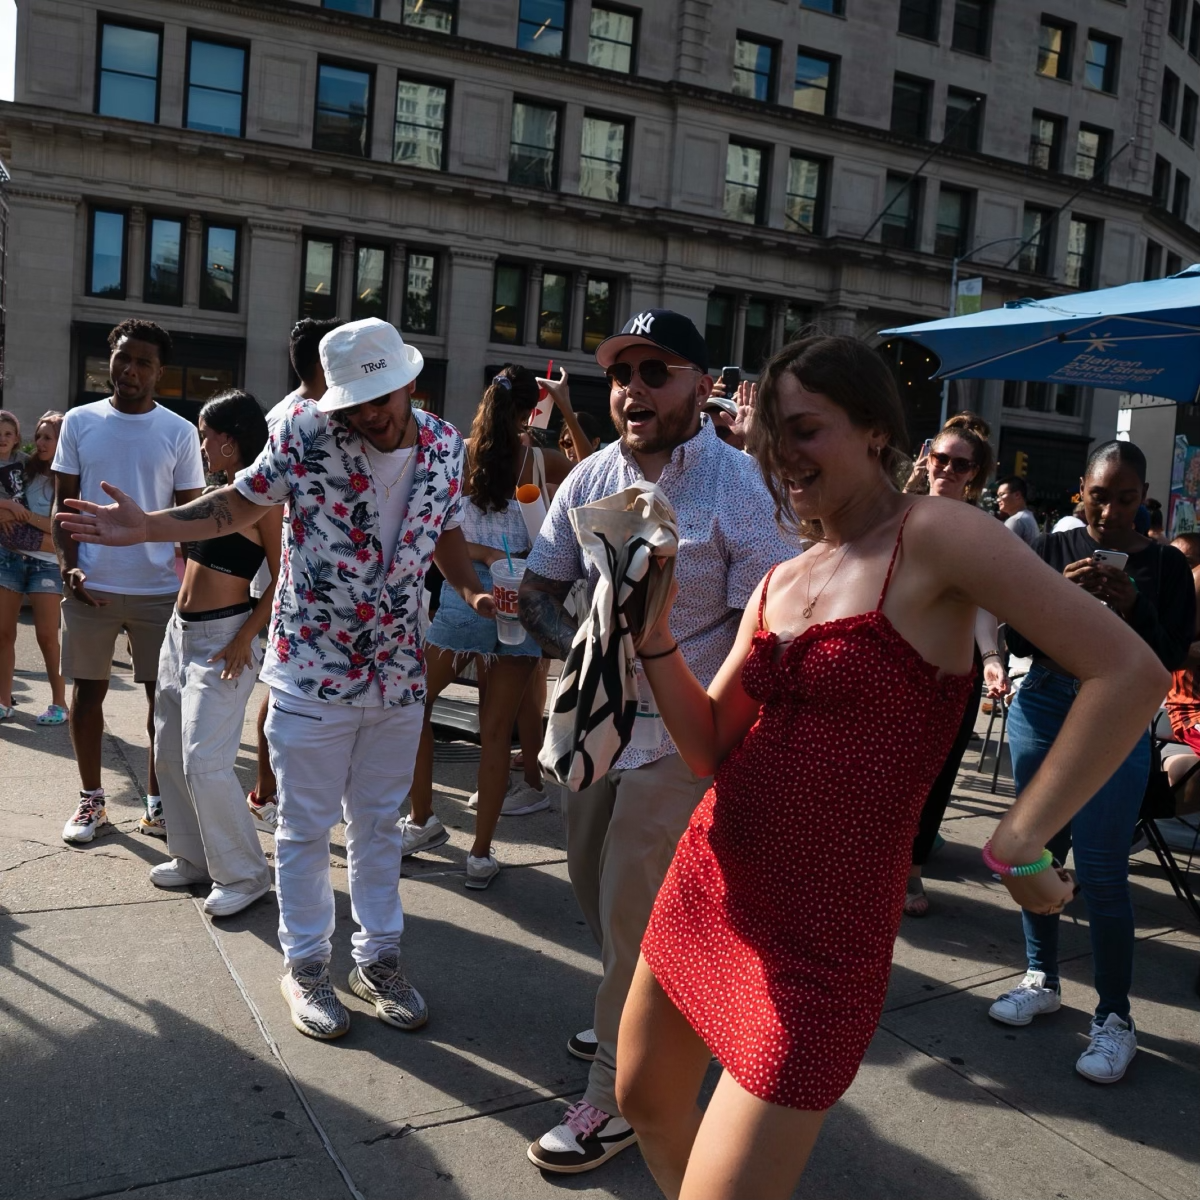 A group of people dance in an open plaza against a city building.